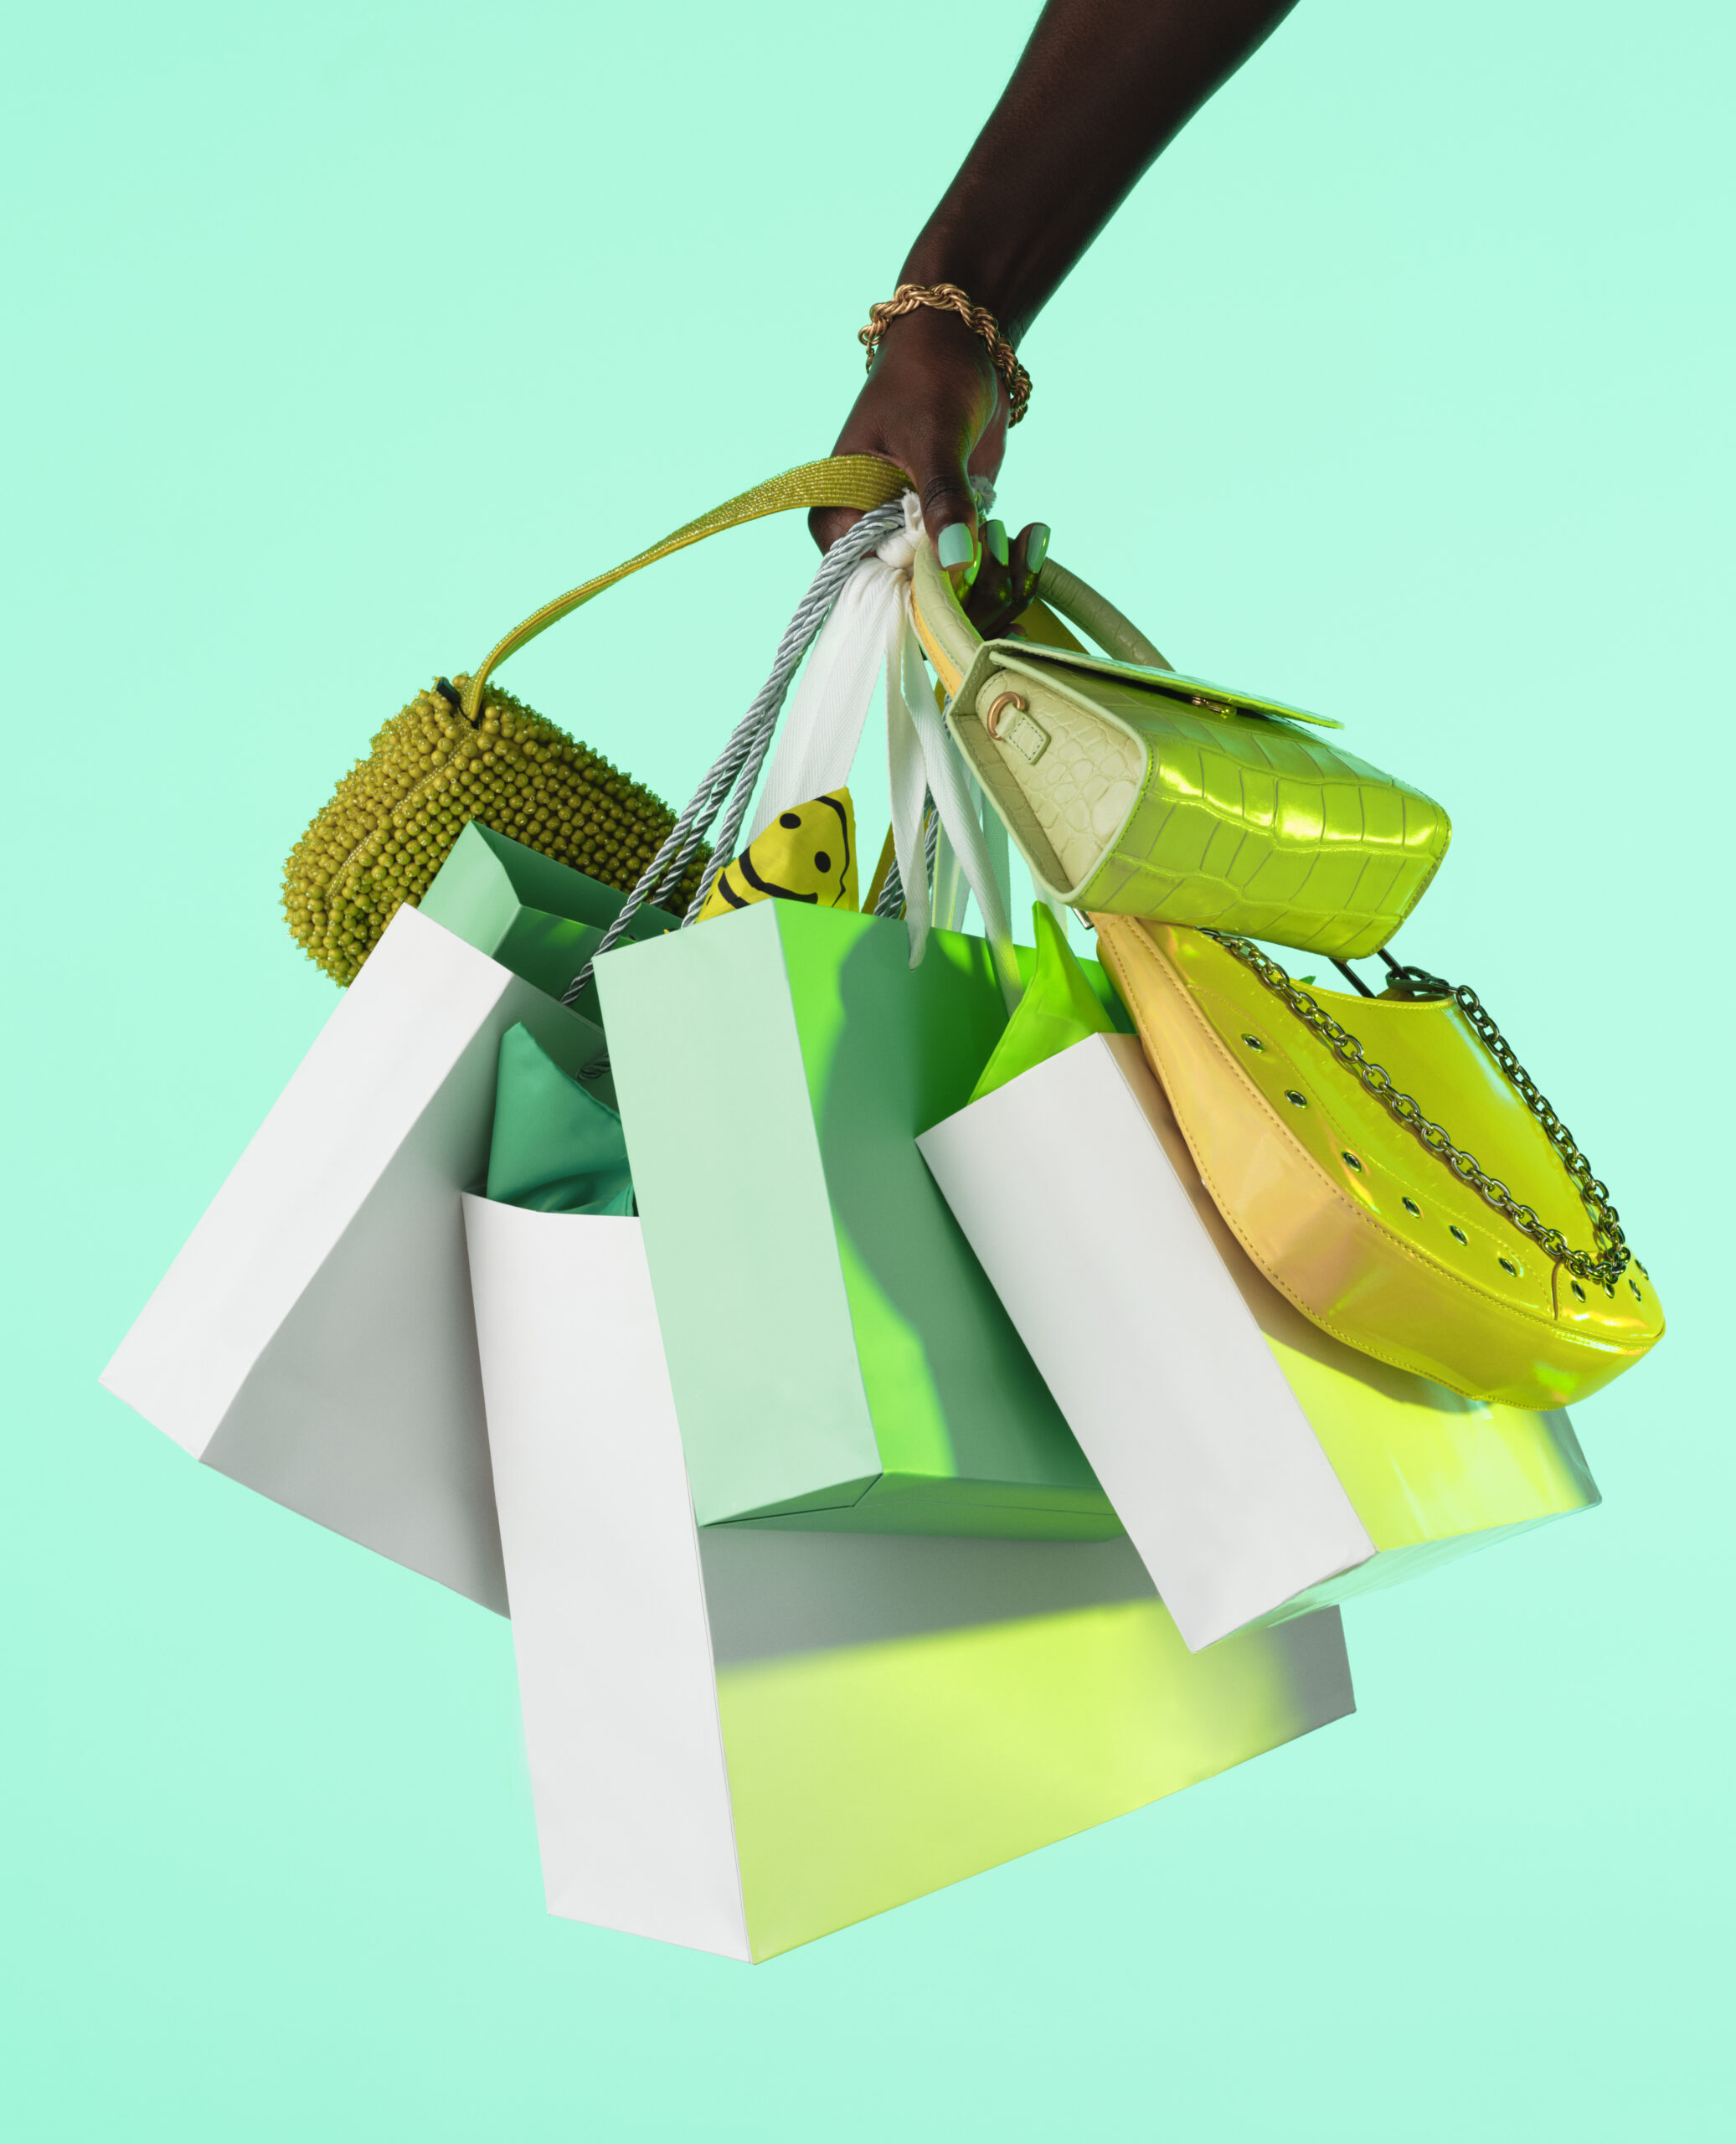 Afterpay Celebrates Spring with Exclusive In-App Shopping Event and New Brand Launches